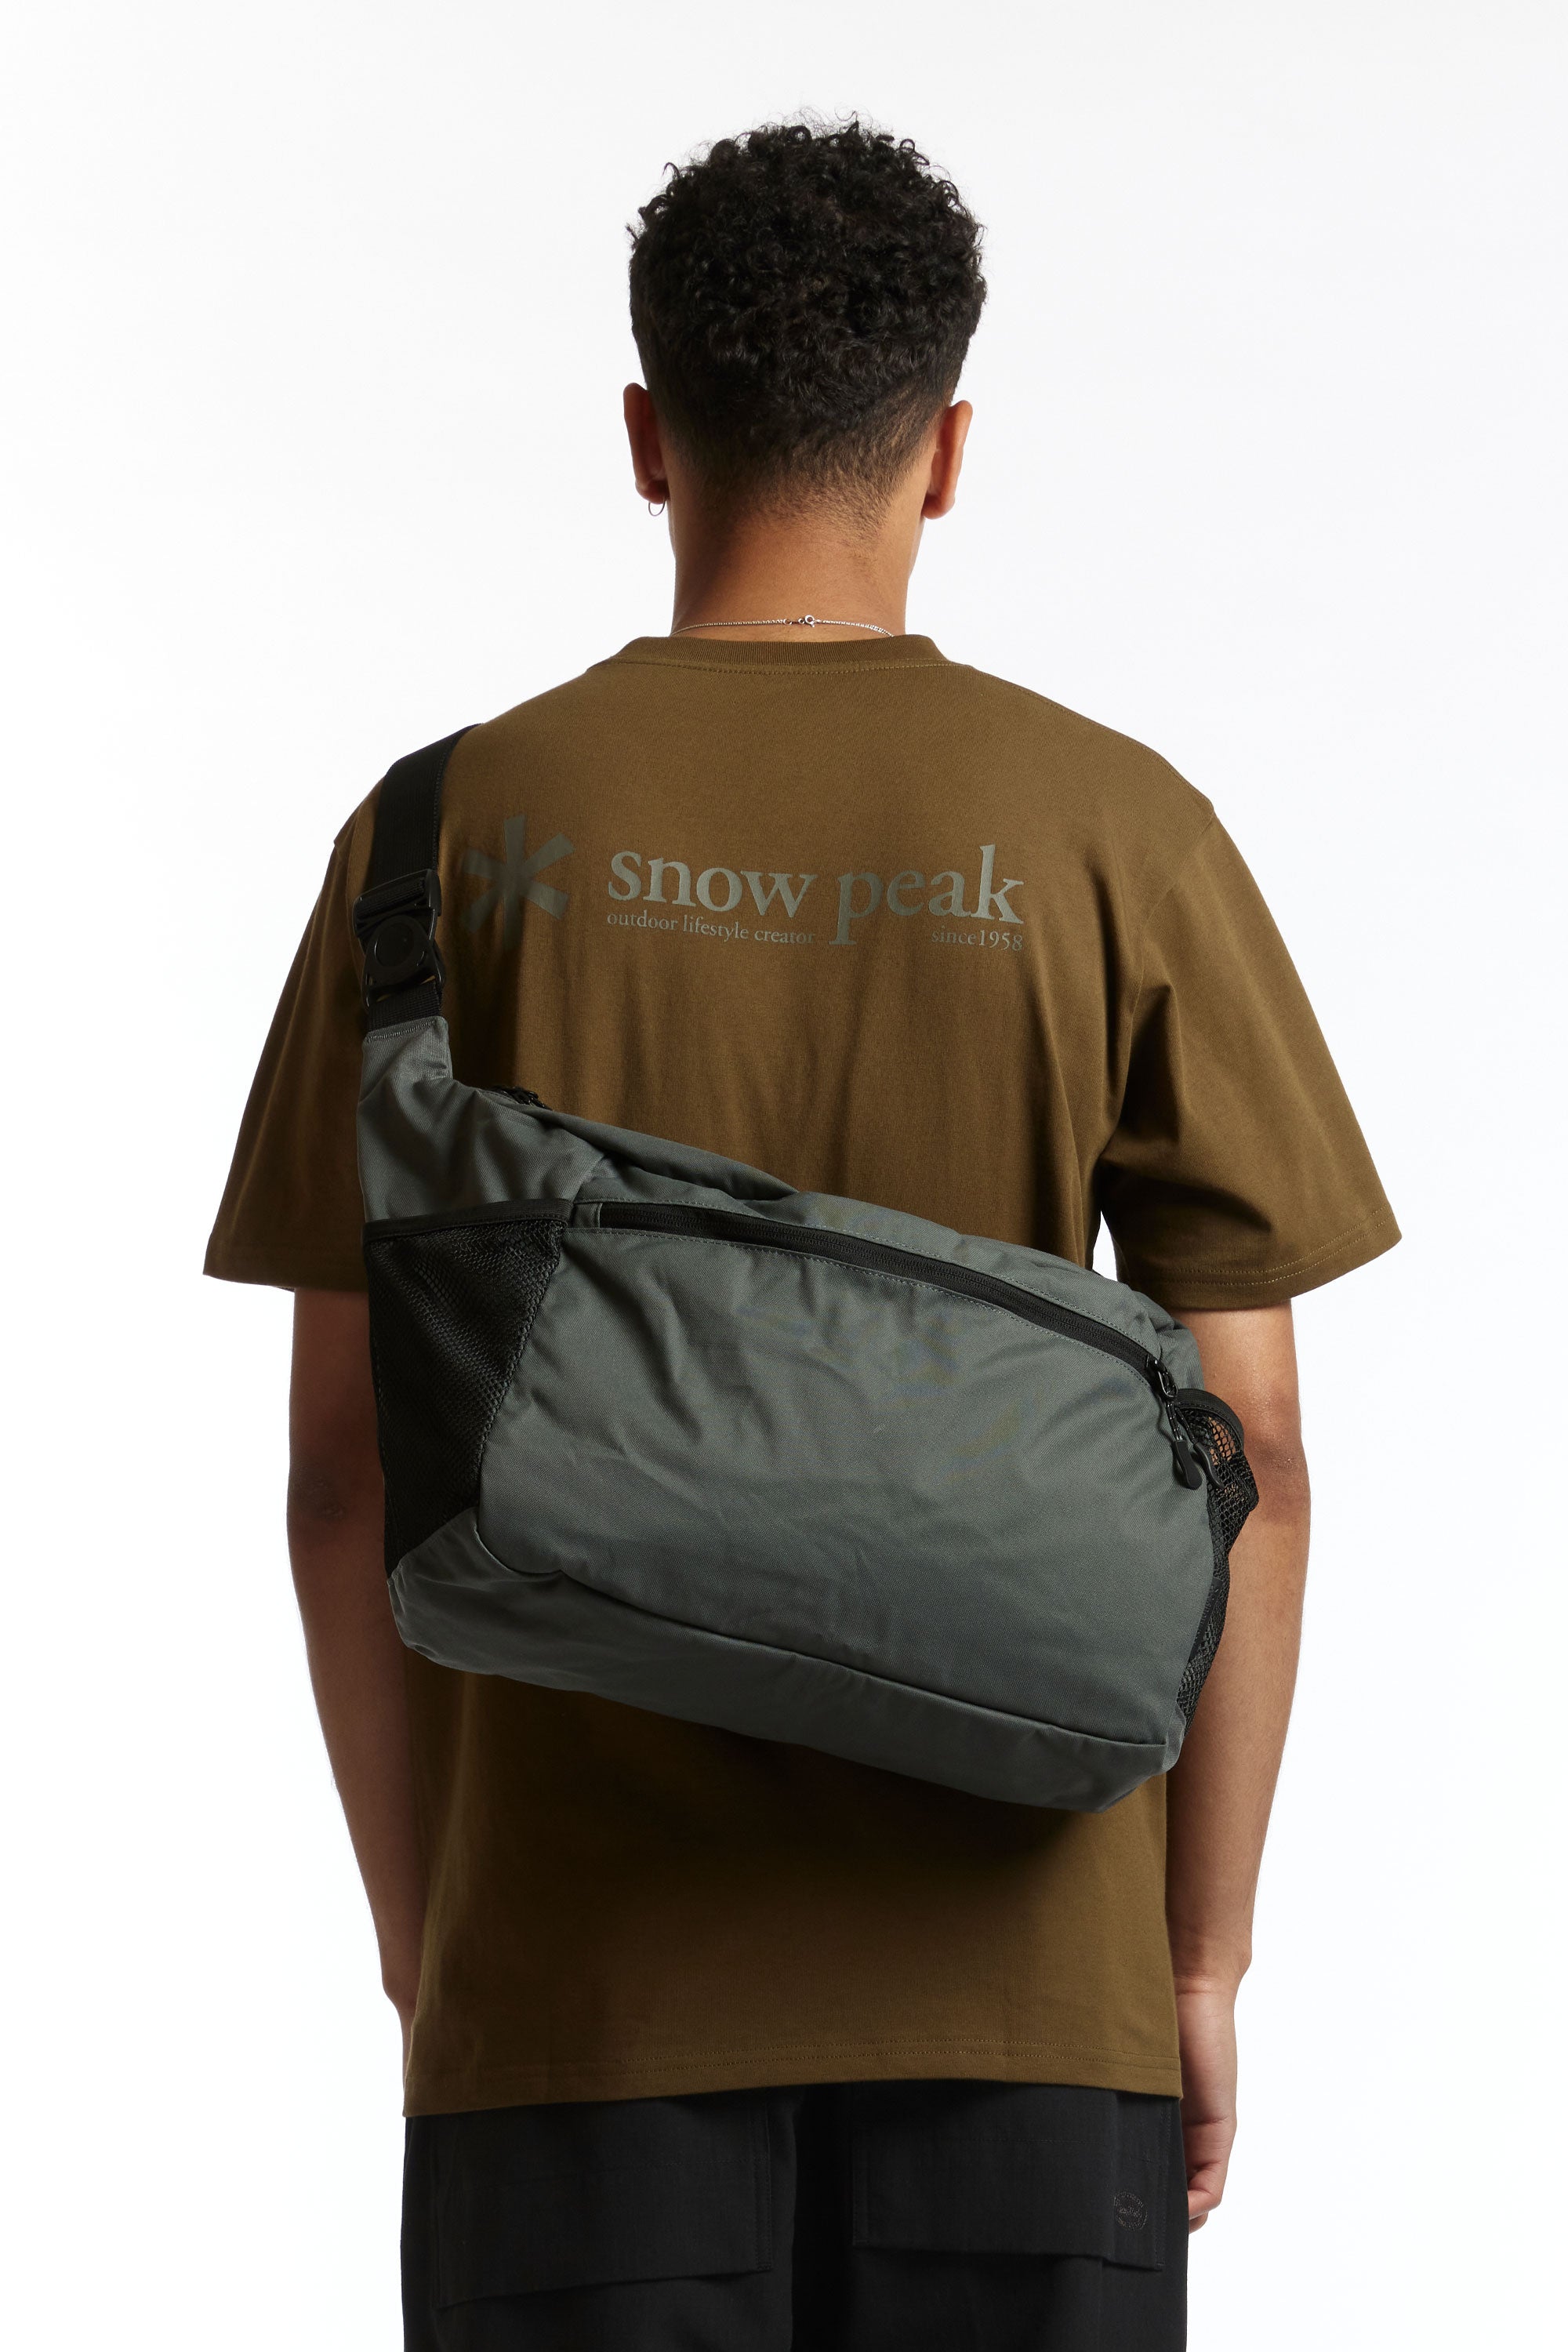 The SNOW PEAK - MIDDLE SHOULDER BAG GREY available online with global shipping, and in PAM Stores Melbourne and Sydney.